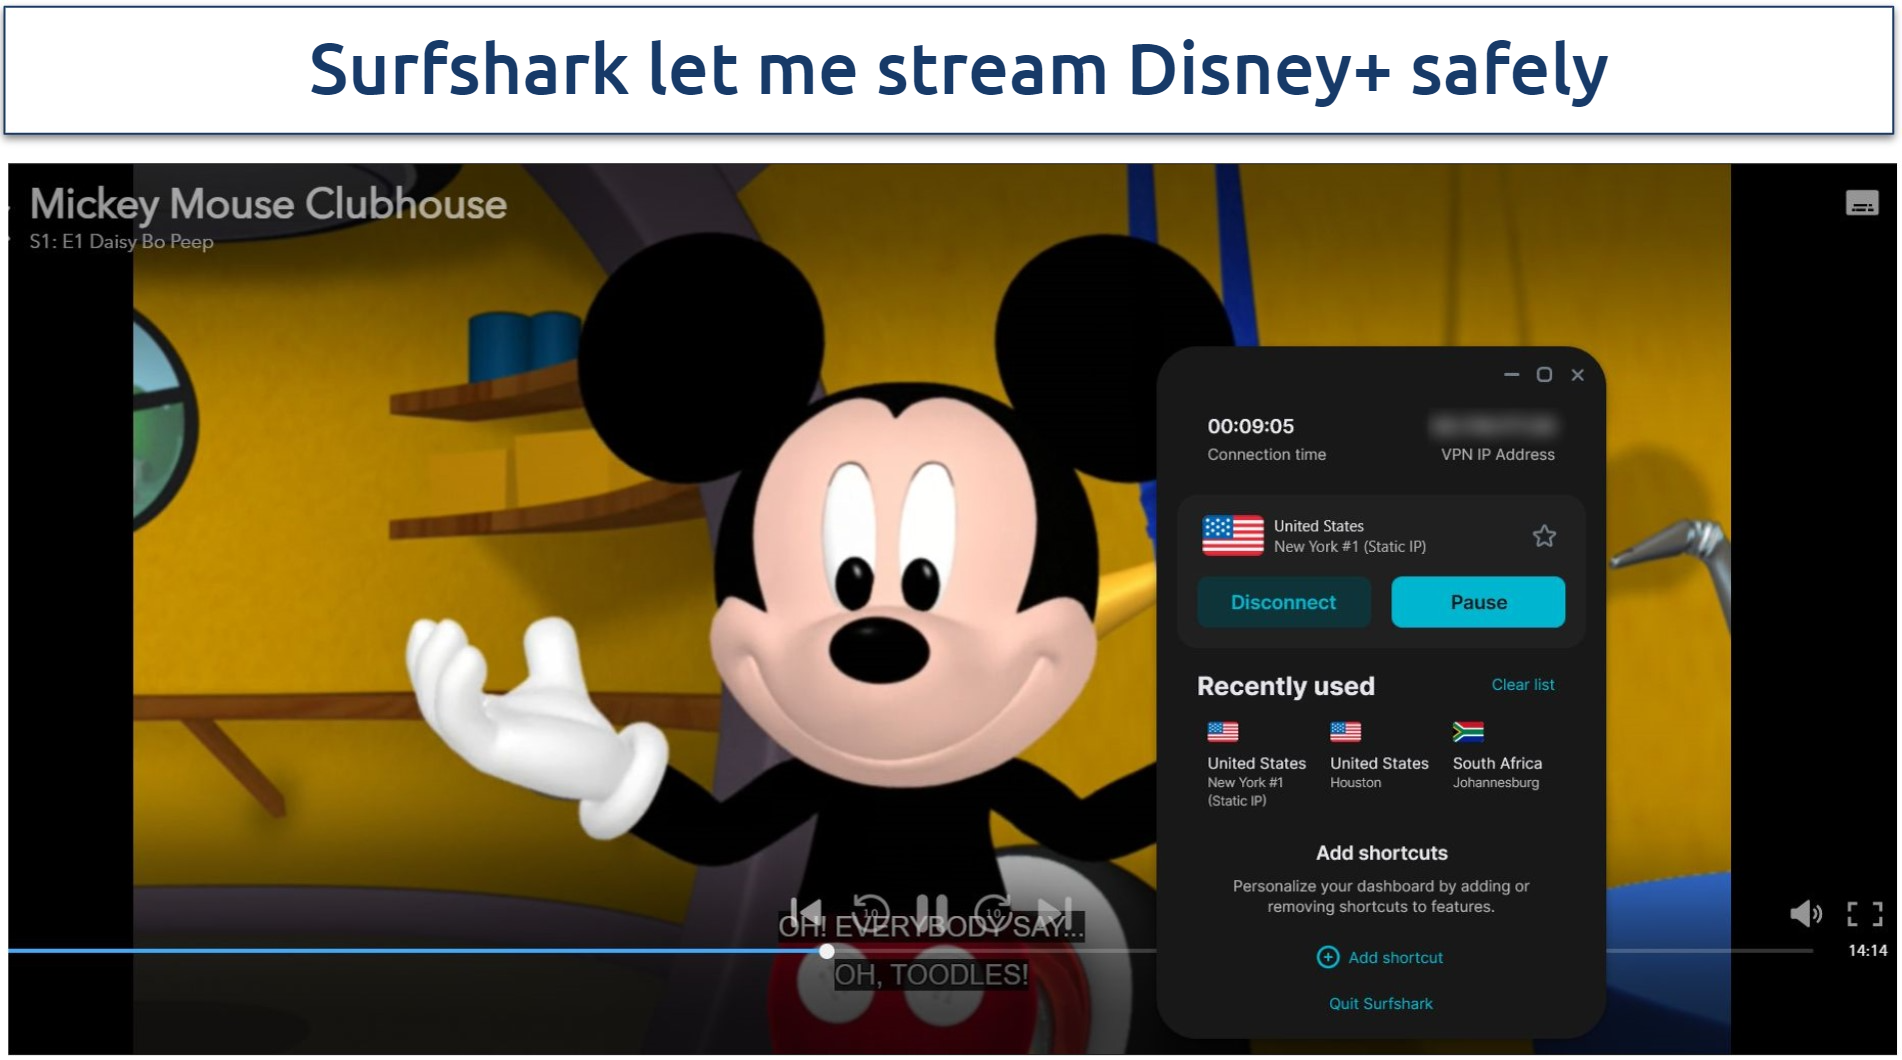 A screenshot of Disney+ streaming Mickey Mouse Clubhouse while connected to Surfshark's US server